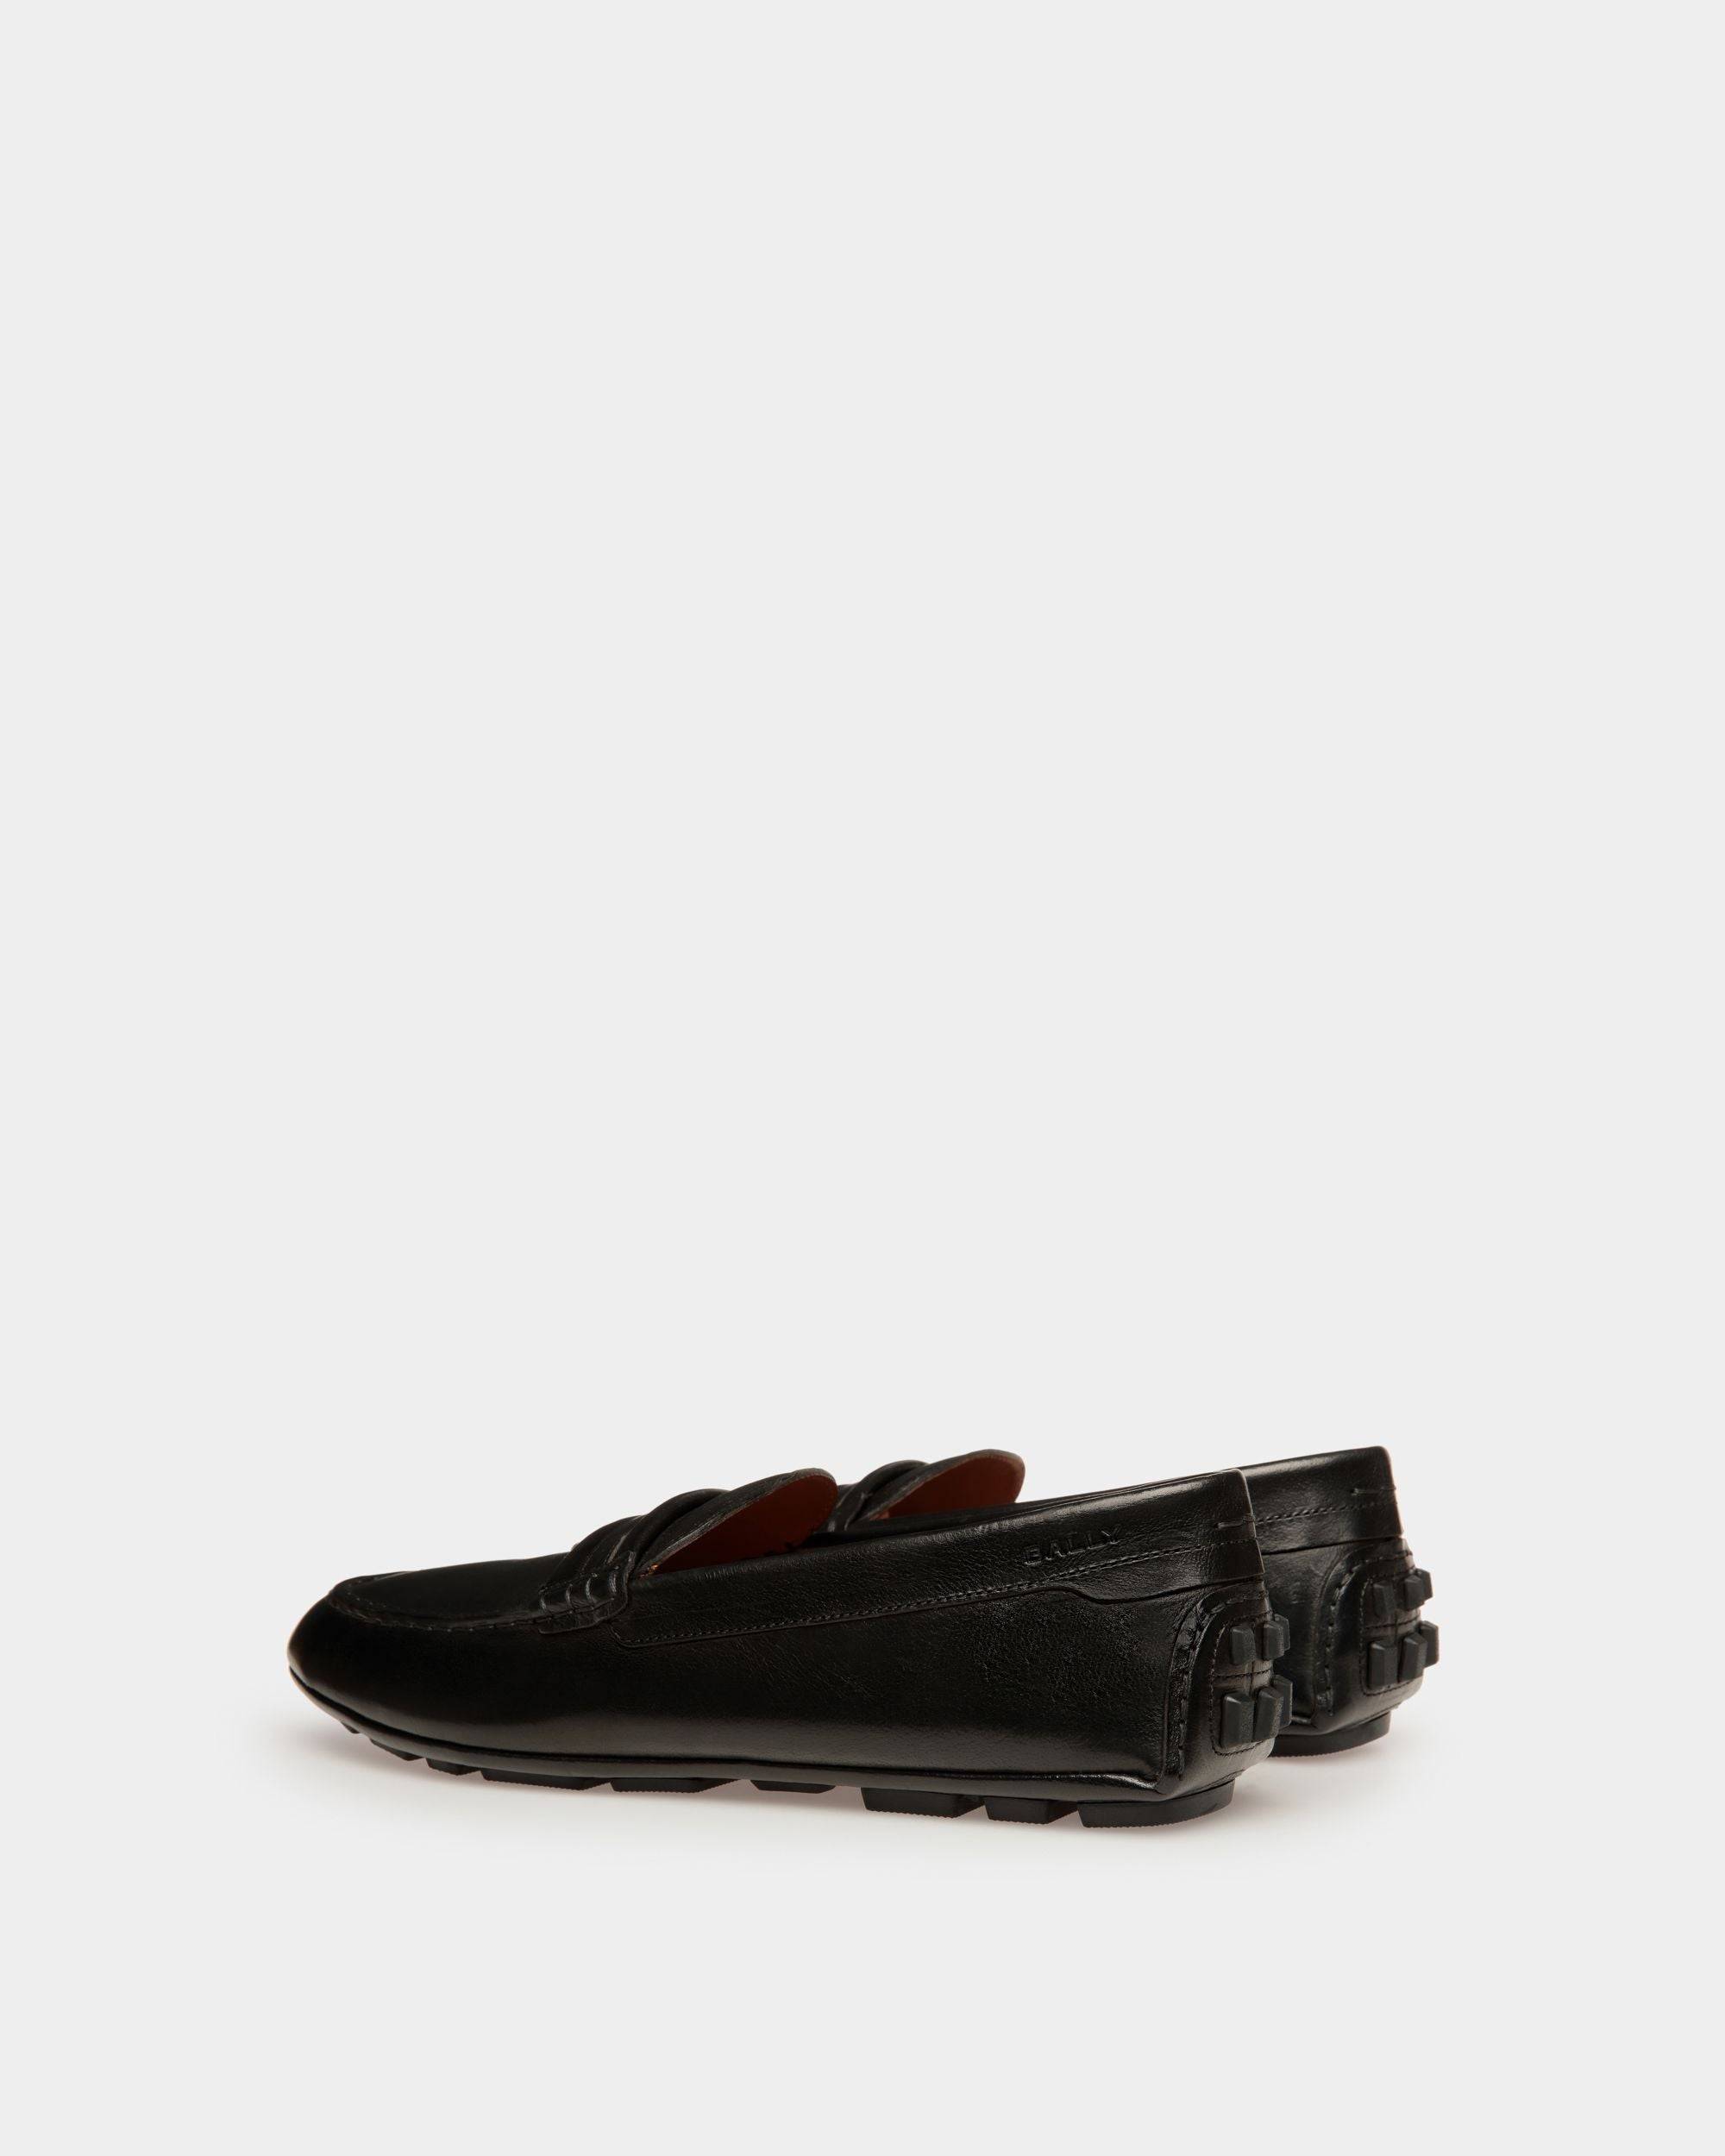 Kerbs | Men's Driver in Black Leather | Bally | Still Life 3/4 Back